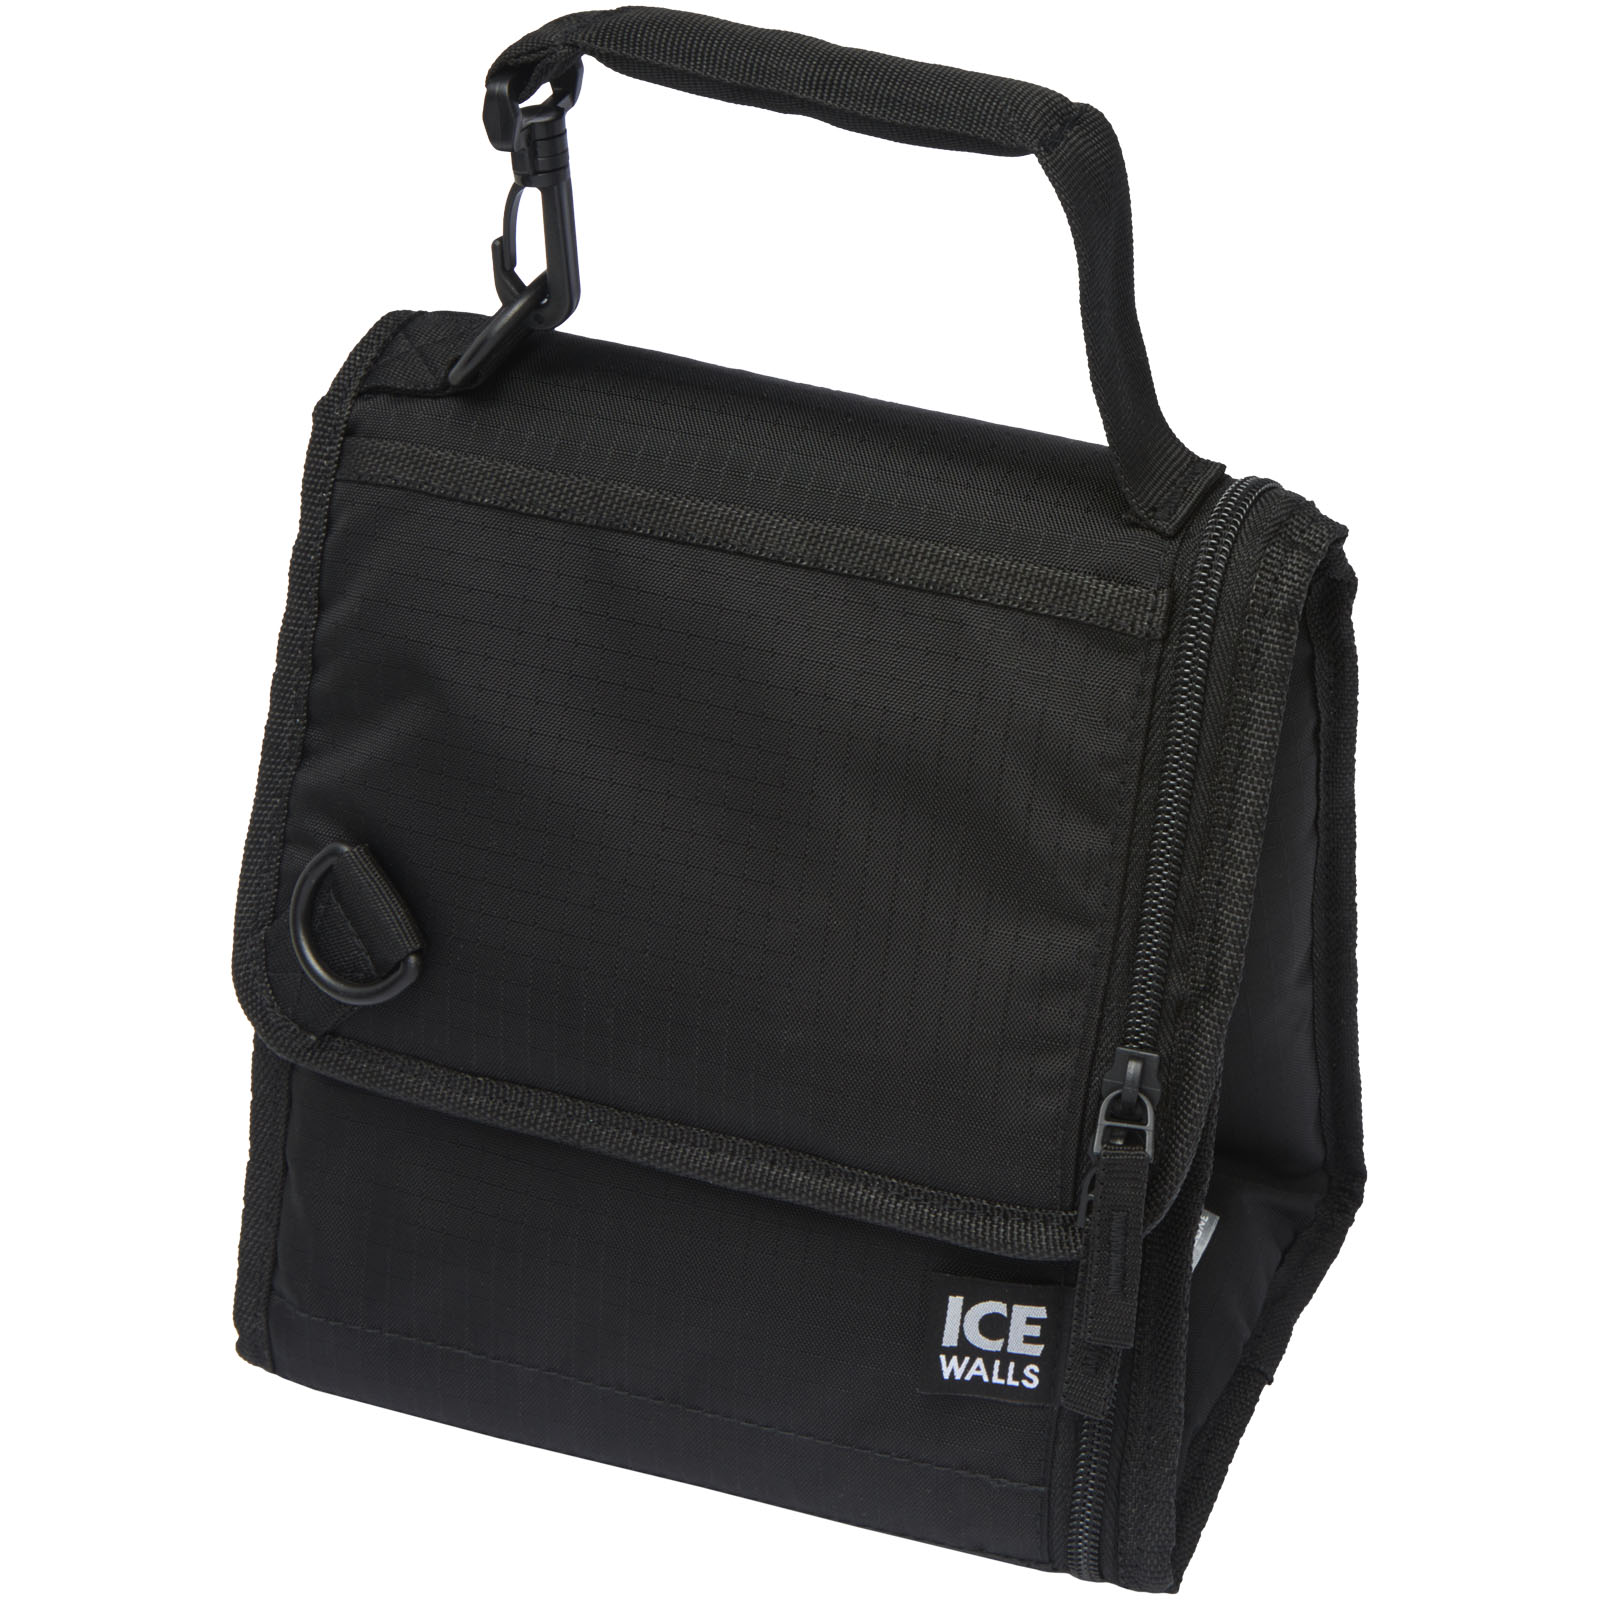 Cooler bags - Arctic Zone® Ice-wall lunch cooler bag 7L